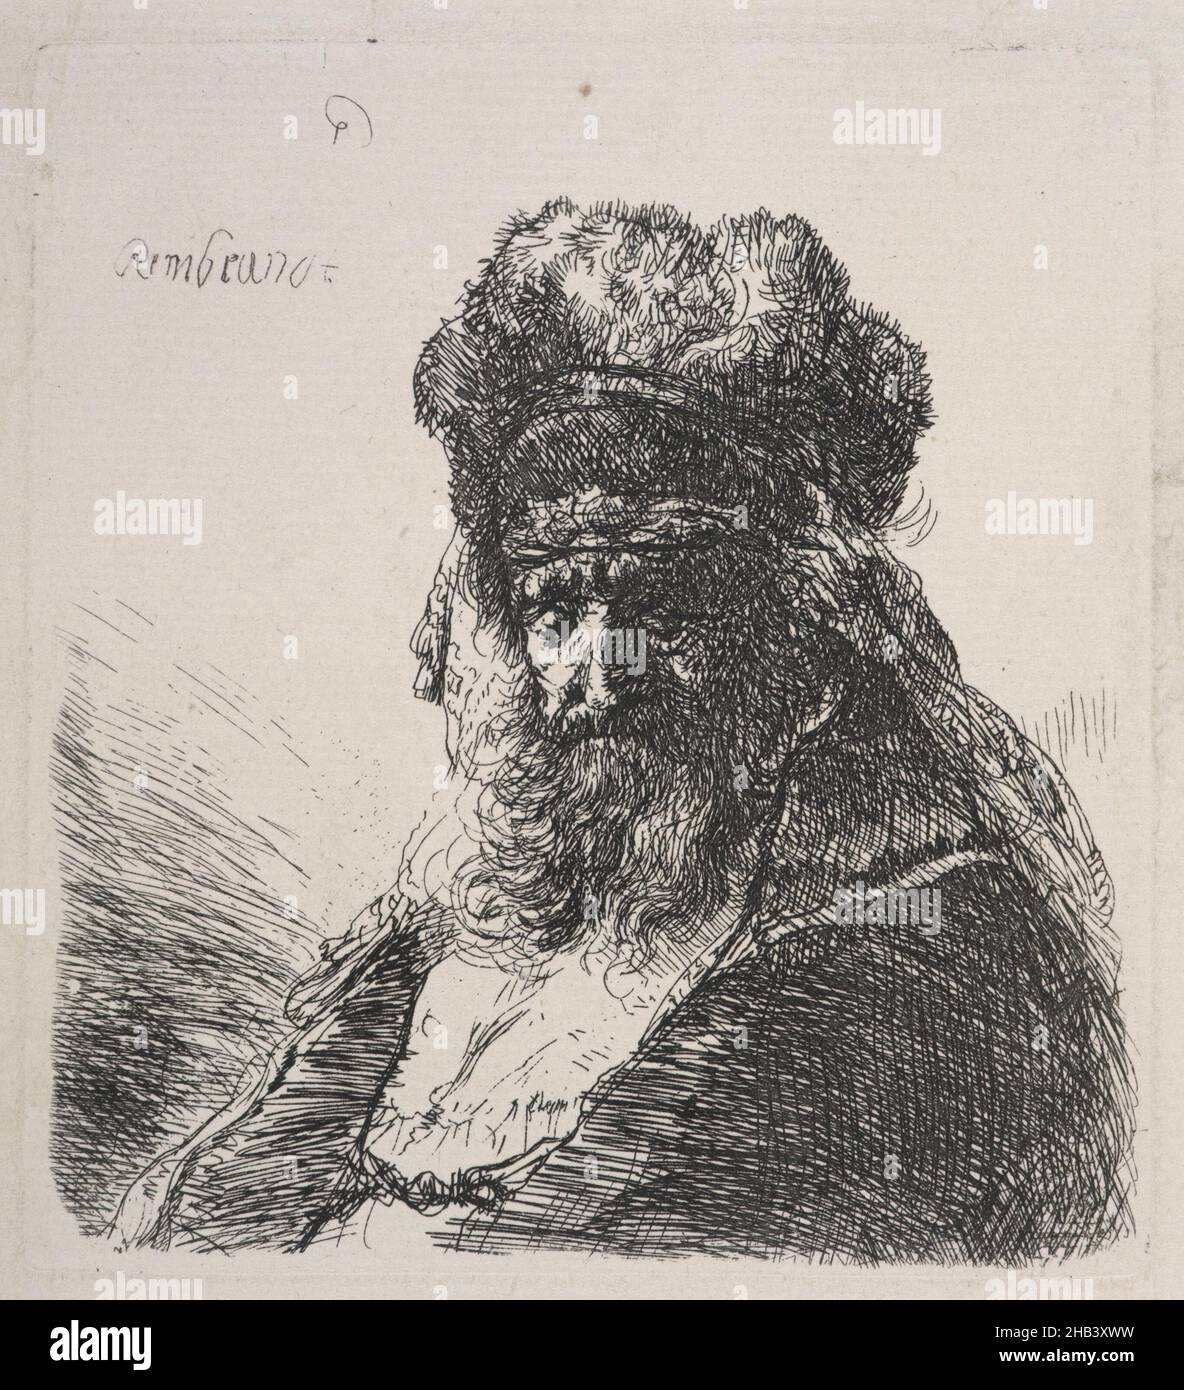 Bearded old man in a high fur cap, with eyes closed., Rembrandt van Rijn, artist, circa 1635, Netherlands, etching, During his lifetime, Rembrandt's extraordinary skills as a printmaker were the main source of his international fame. Unlike his oil paintings, prints travelled light and were relatively cheap. For this reason, they soon became very popular with collectors not only within, but also beyond the borders of the Netherlands, and it also explains why, three centuries later, they were affordable for Wellington collector and philanthropist Sir John Ilott Stock Photo